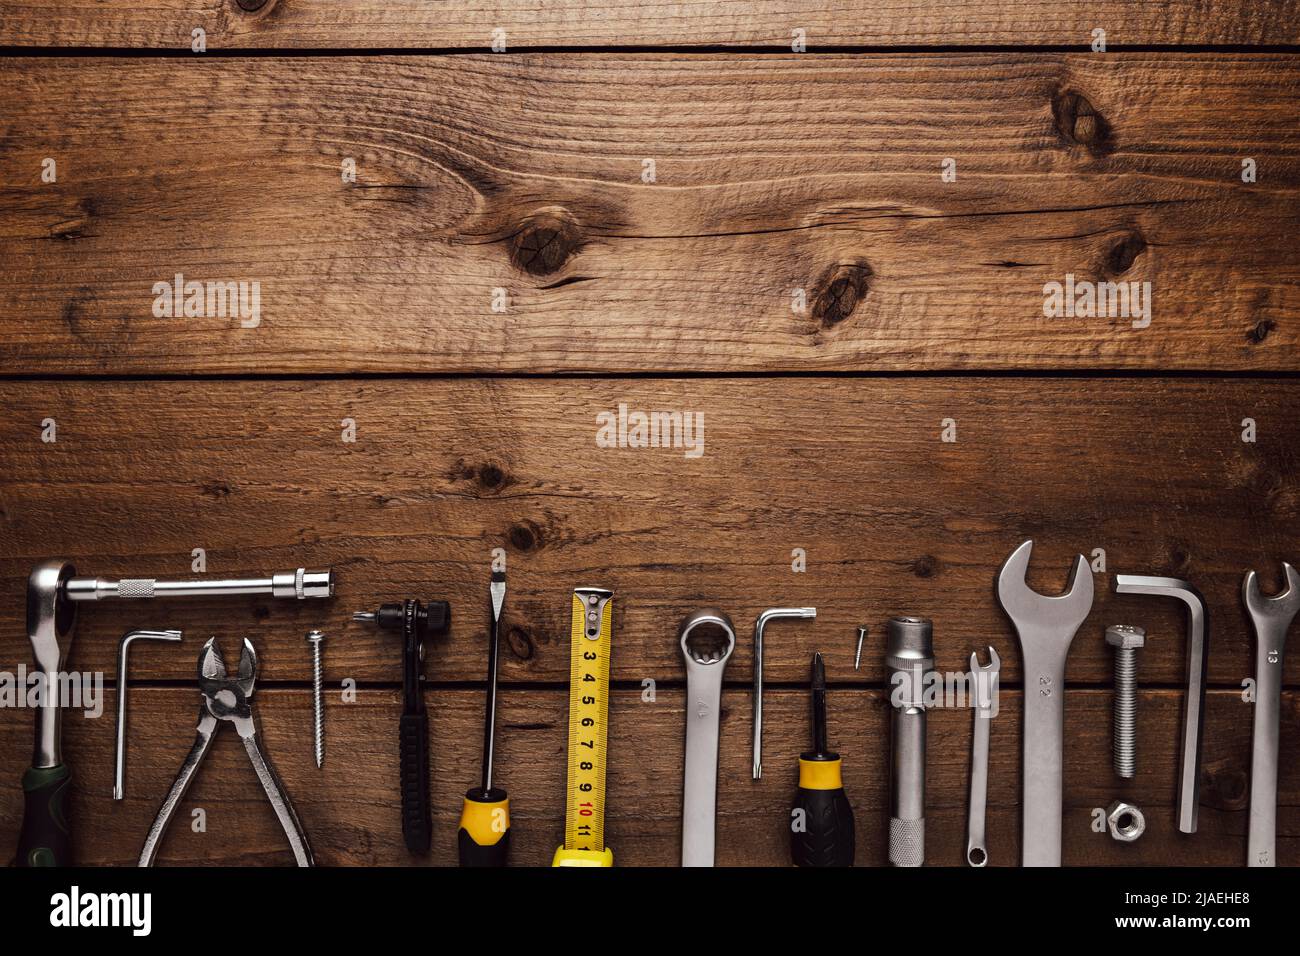 Flat lay with various work tools on wooden background working table. Top view on new hand tool set for repair, construction kit, overhead. Must-have for men. Equipment for building. Industry concept Stock Photo